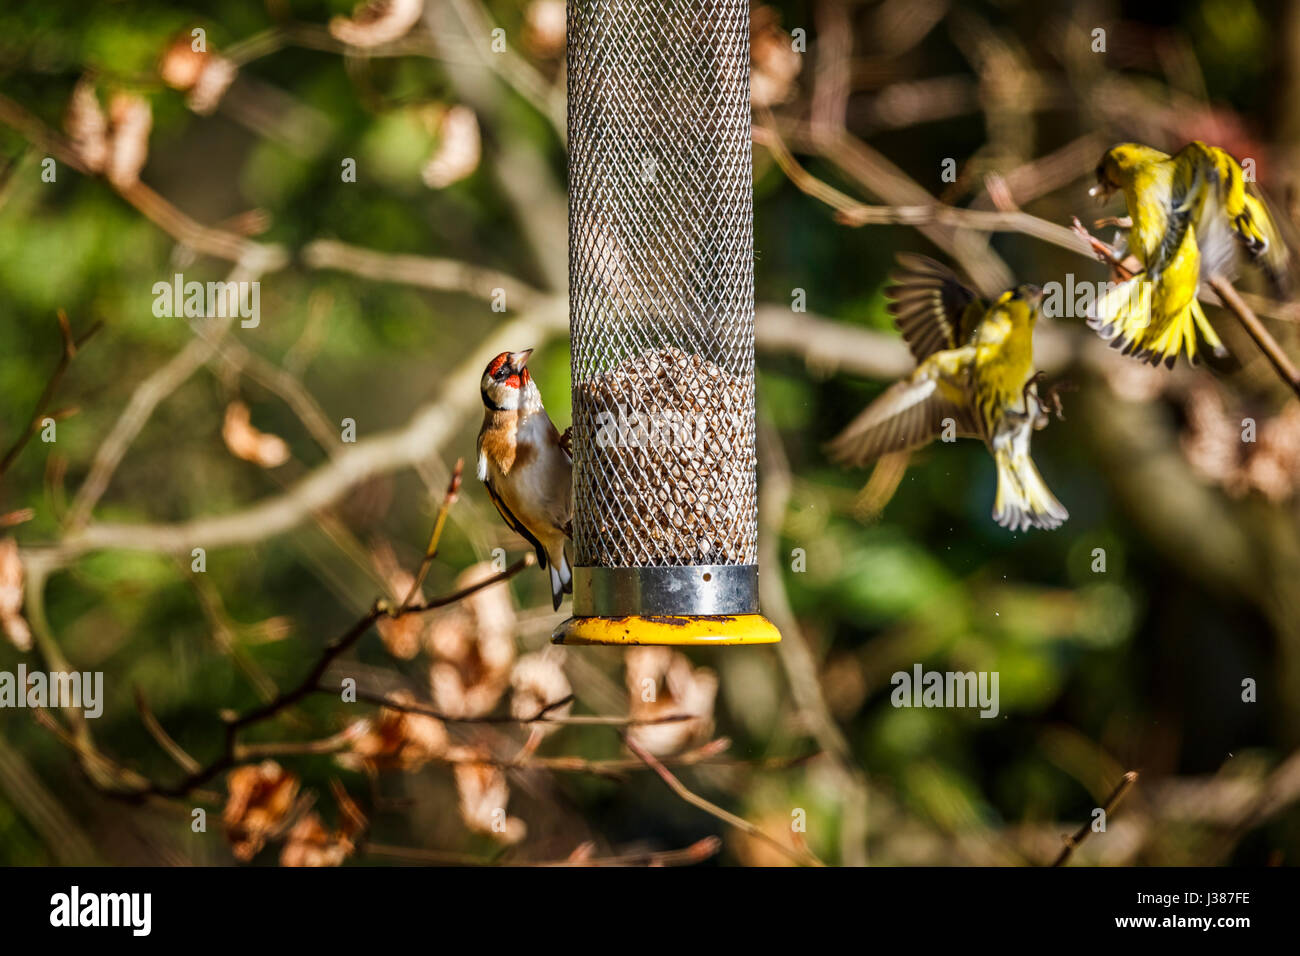 European goldfinch (Carduelis carduelis) feeds on sunflower hearts from a bird feeder as two Eurasian siskins (Carduelis spinus) fight, Surrey, UK Stock Photo